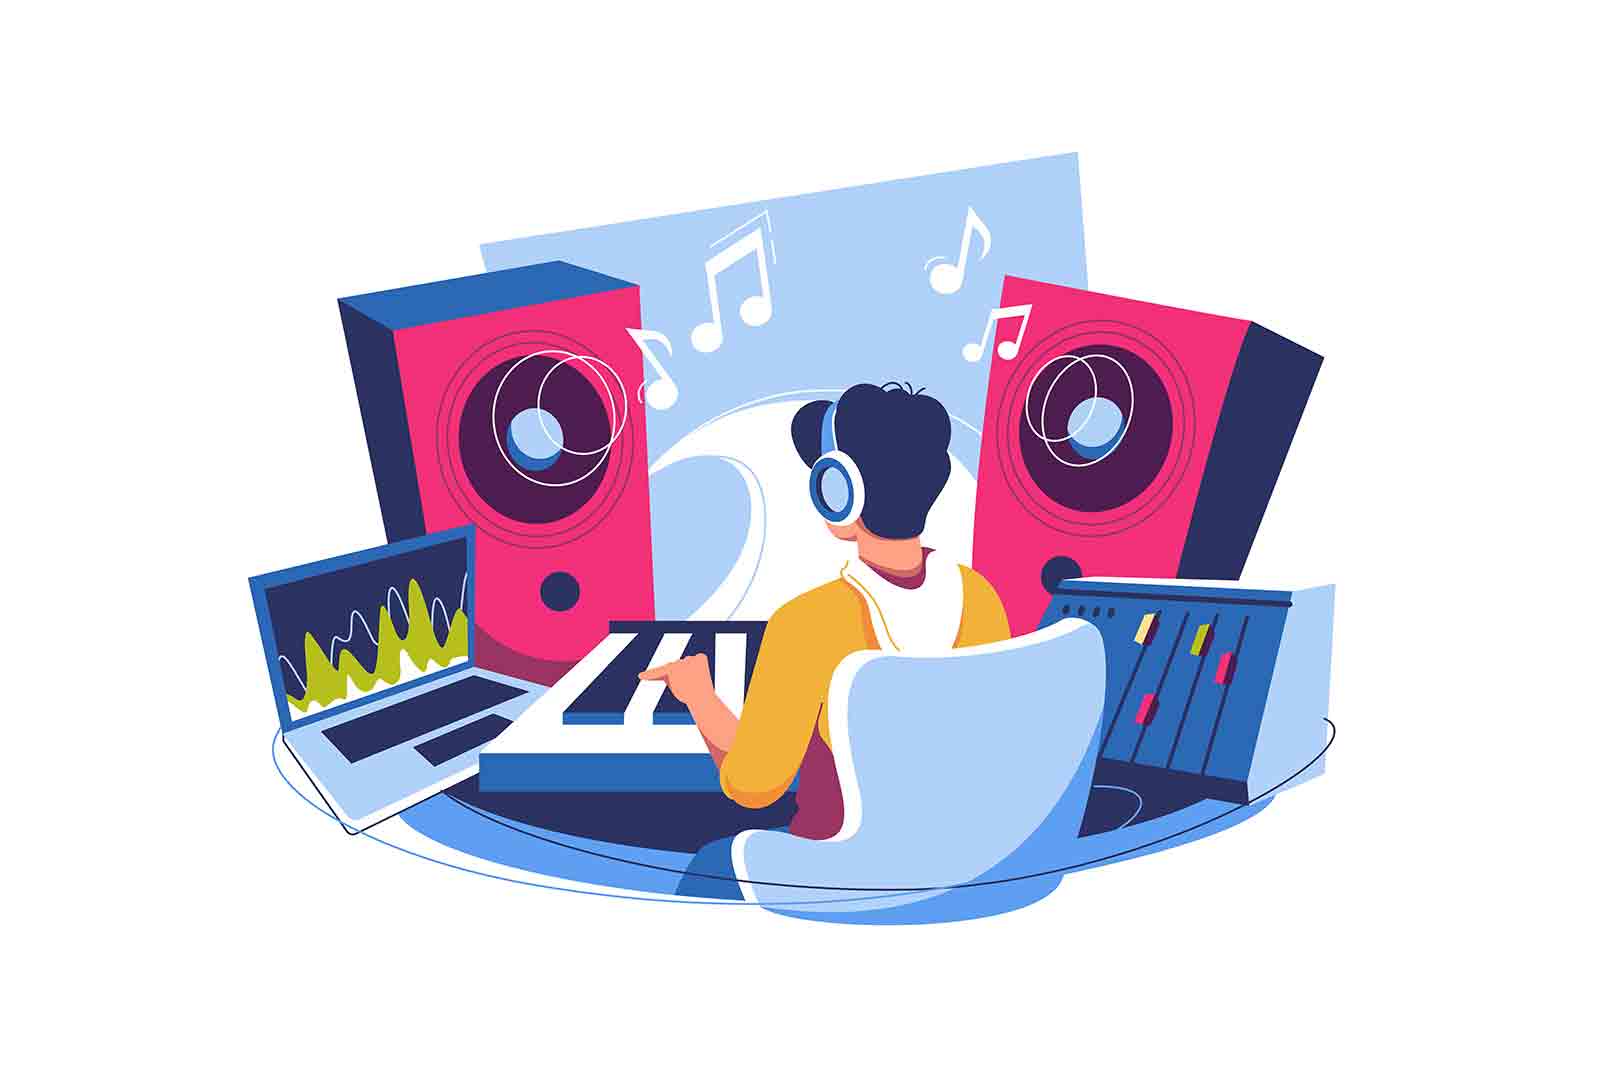 Music composer creating and recording music at workplace with computer, professional equipment, software vector illustration. Musician idea